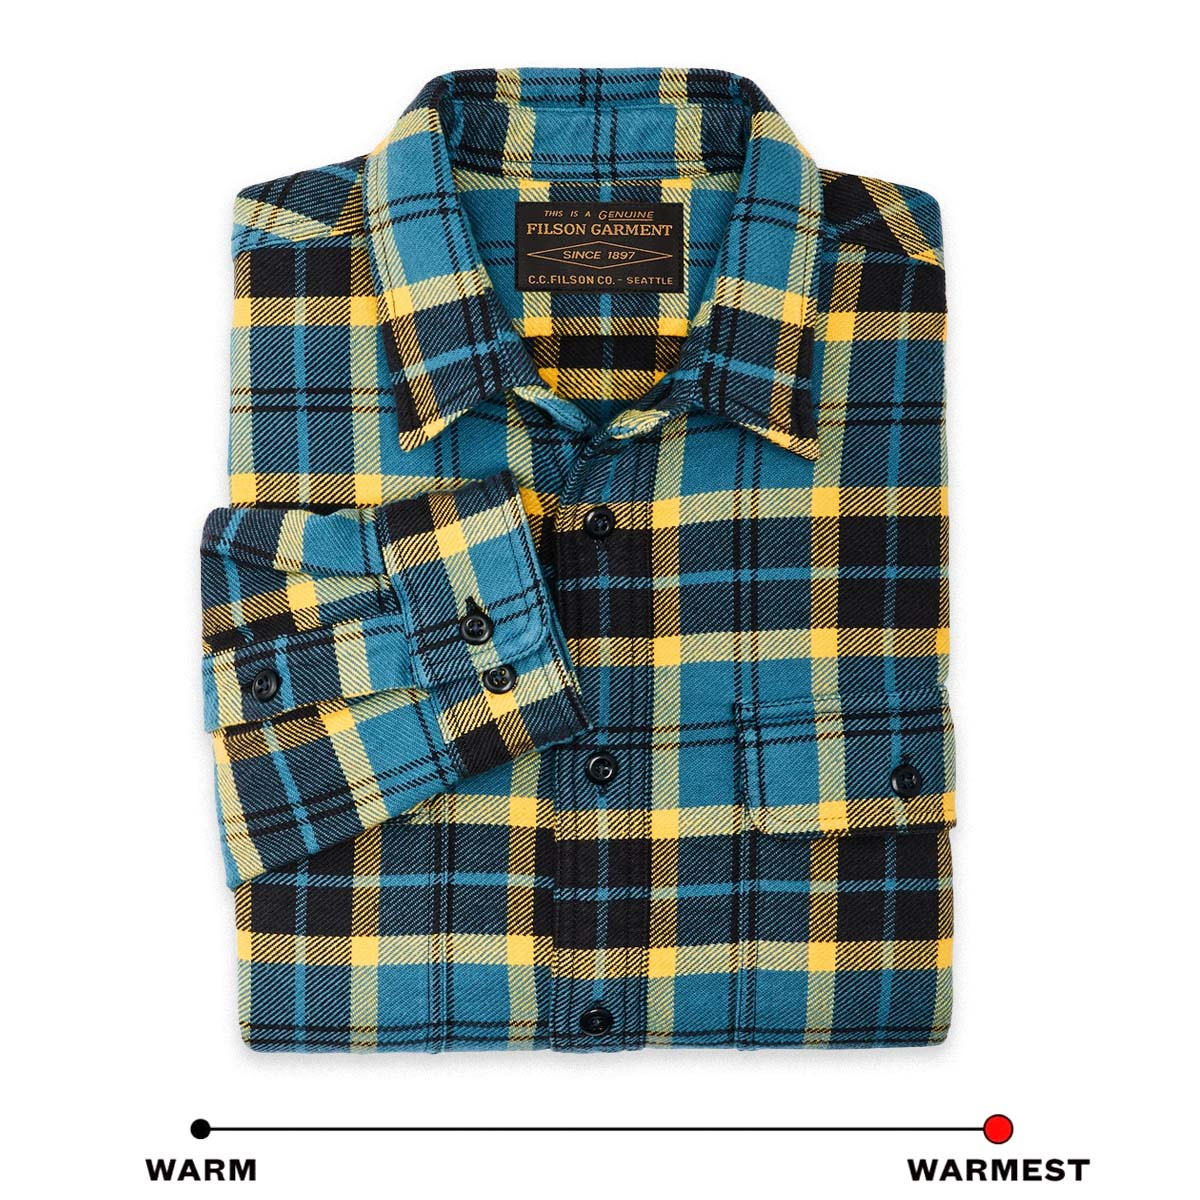 Filson Vintage Flannel Work Shirt Blue Ash Gold Plaid, built with thick and breathable cotton flannel, it’s ideal for cold weather